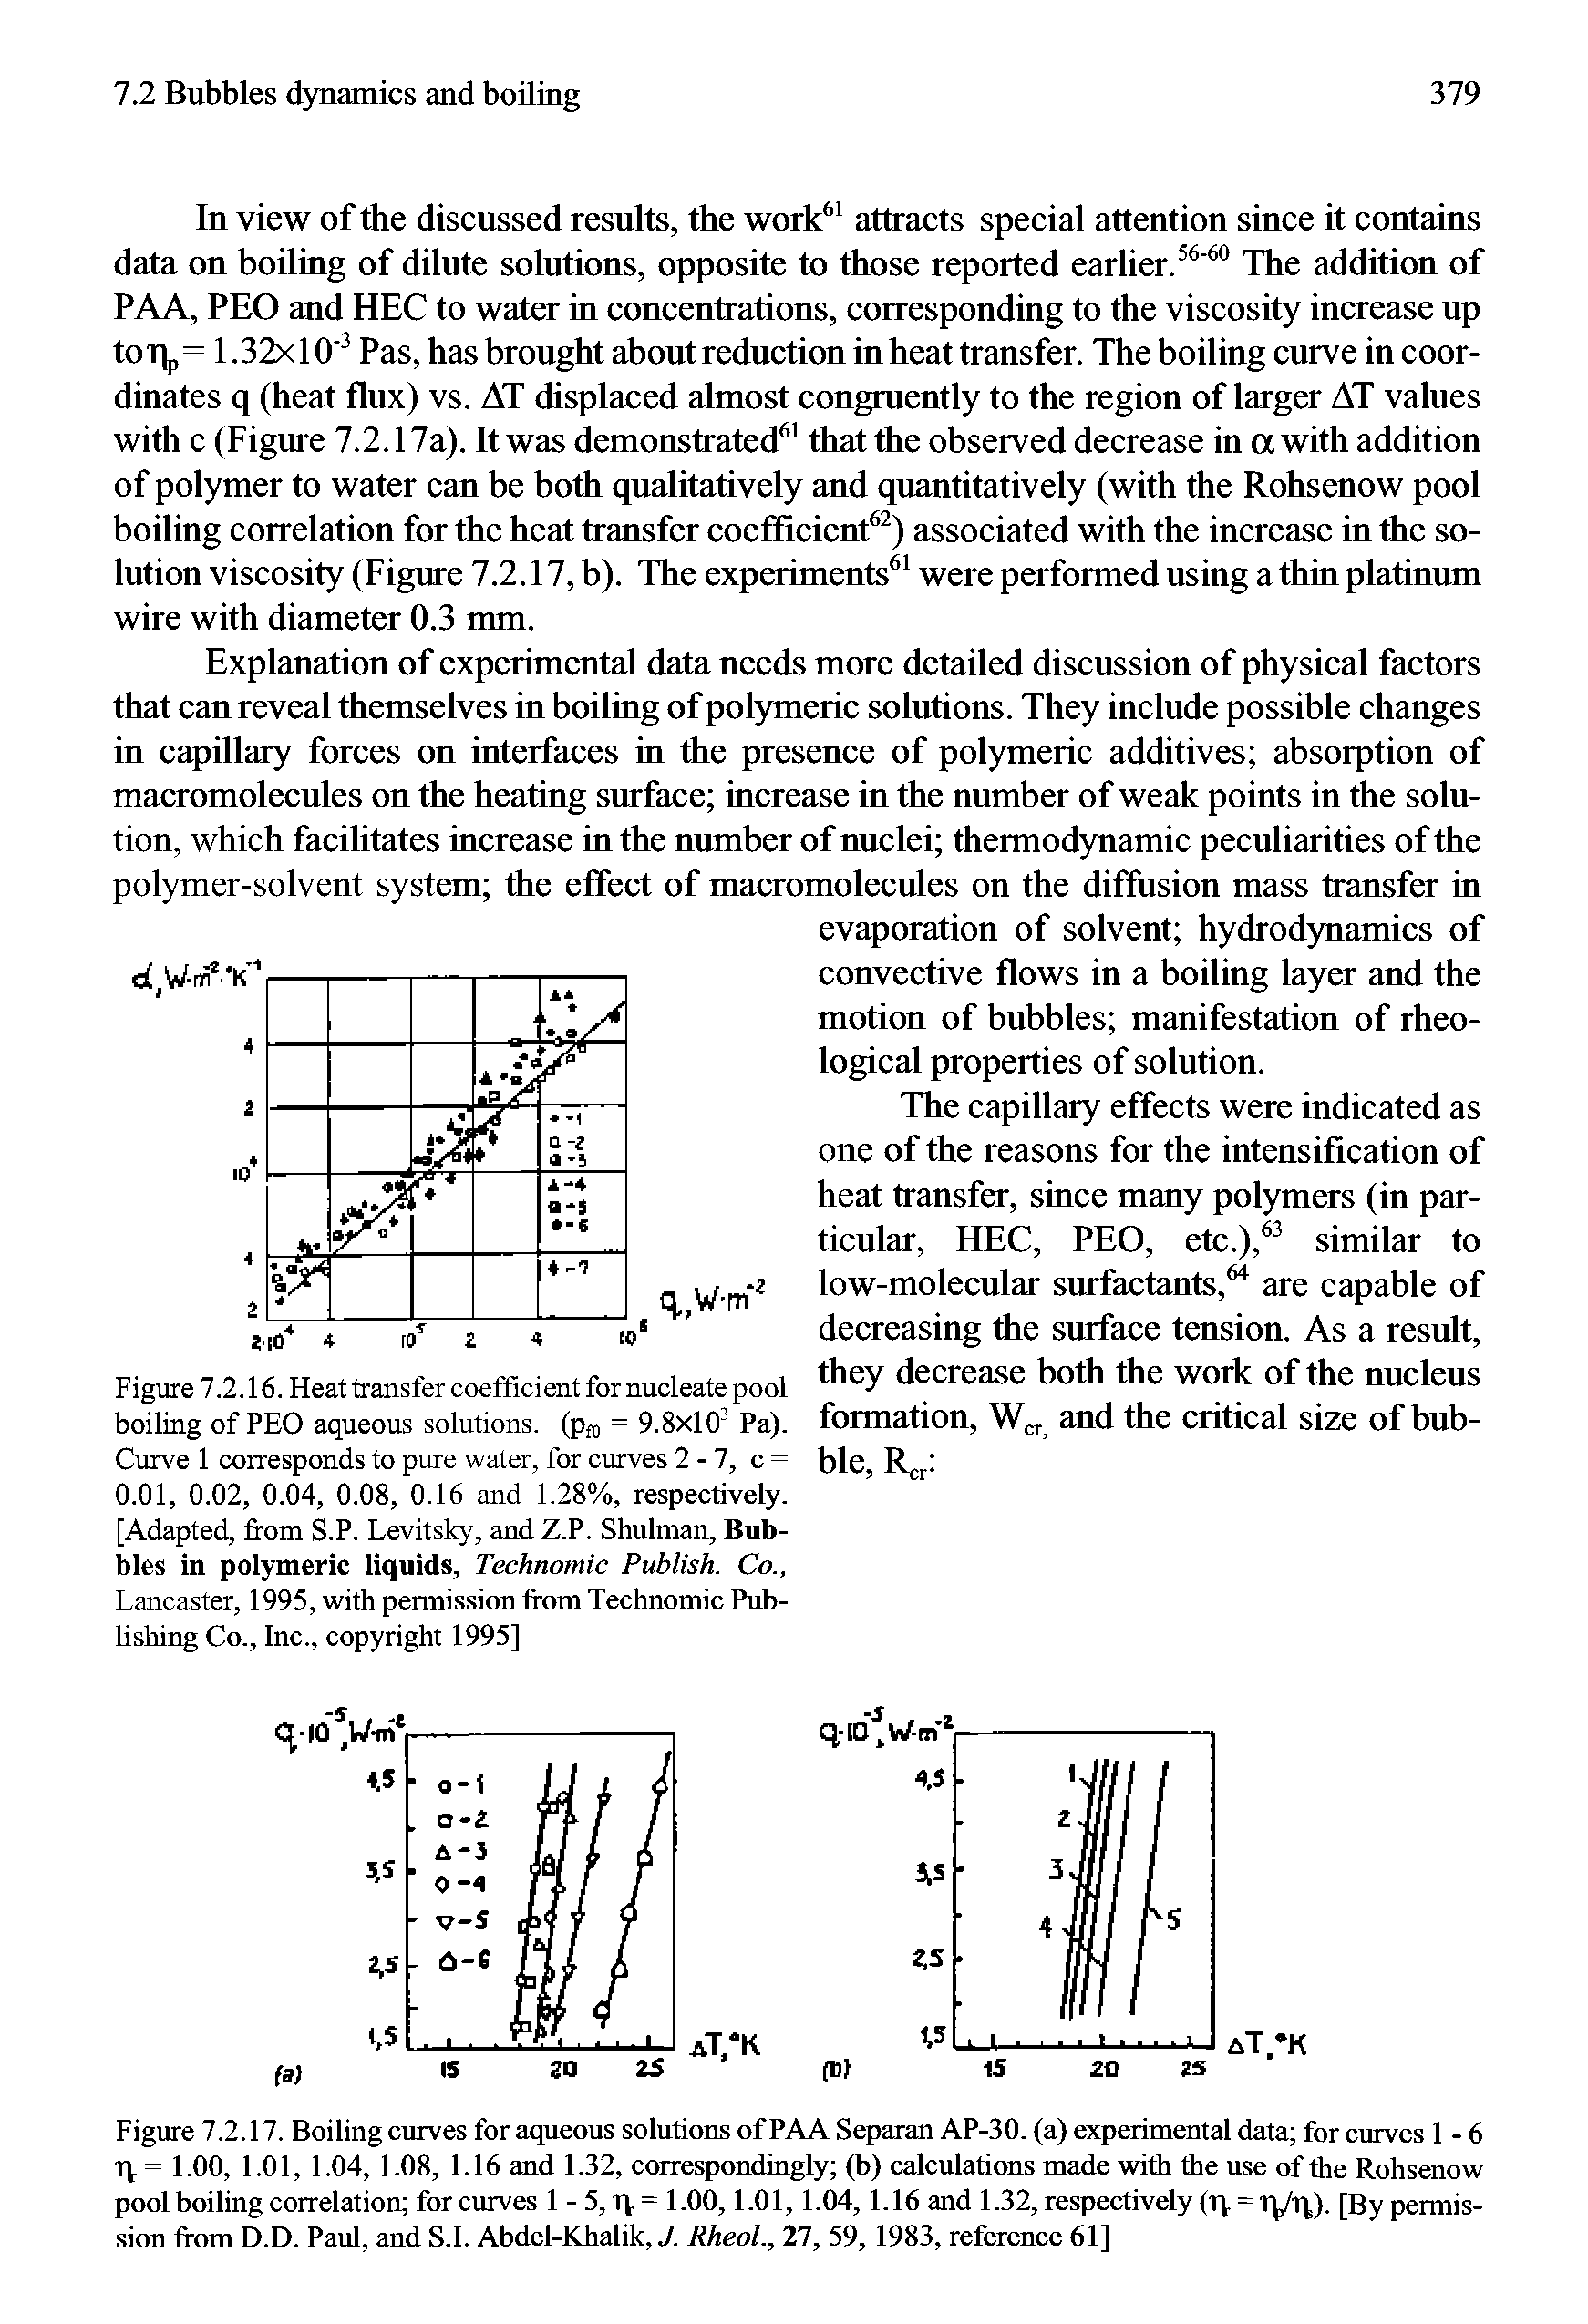 Figure 7.2.17. Boiling curves for aqueous solutions of PAA Separan AP-30. (a) experimental data for curves 1-6 = 1.00, 1.01, 1.04, 1.08, 1.16 and 1.32, correspondingly (b) calculations made with the use of the Rohsenow pool boiling correlation for curves 1 - 5, r= 1.00,1.01,1.04,1.16 and 1.32, respectively (lv = iyT, ). [By permission from D.D. Paul, and S.I. Abdel-Khalik, J. Rheol., 27, 59, 1983, reference 61]...